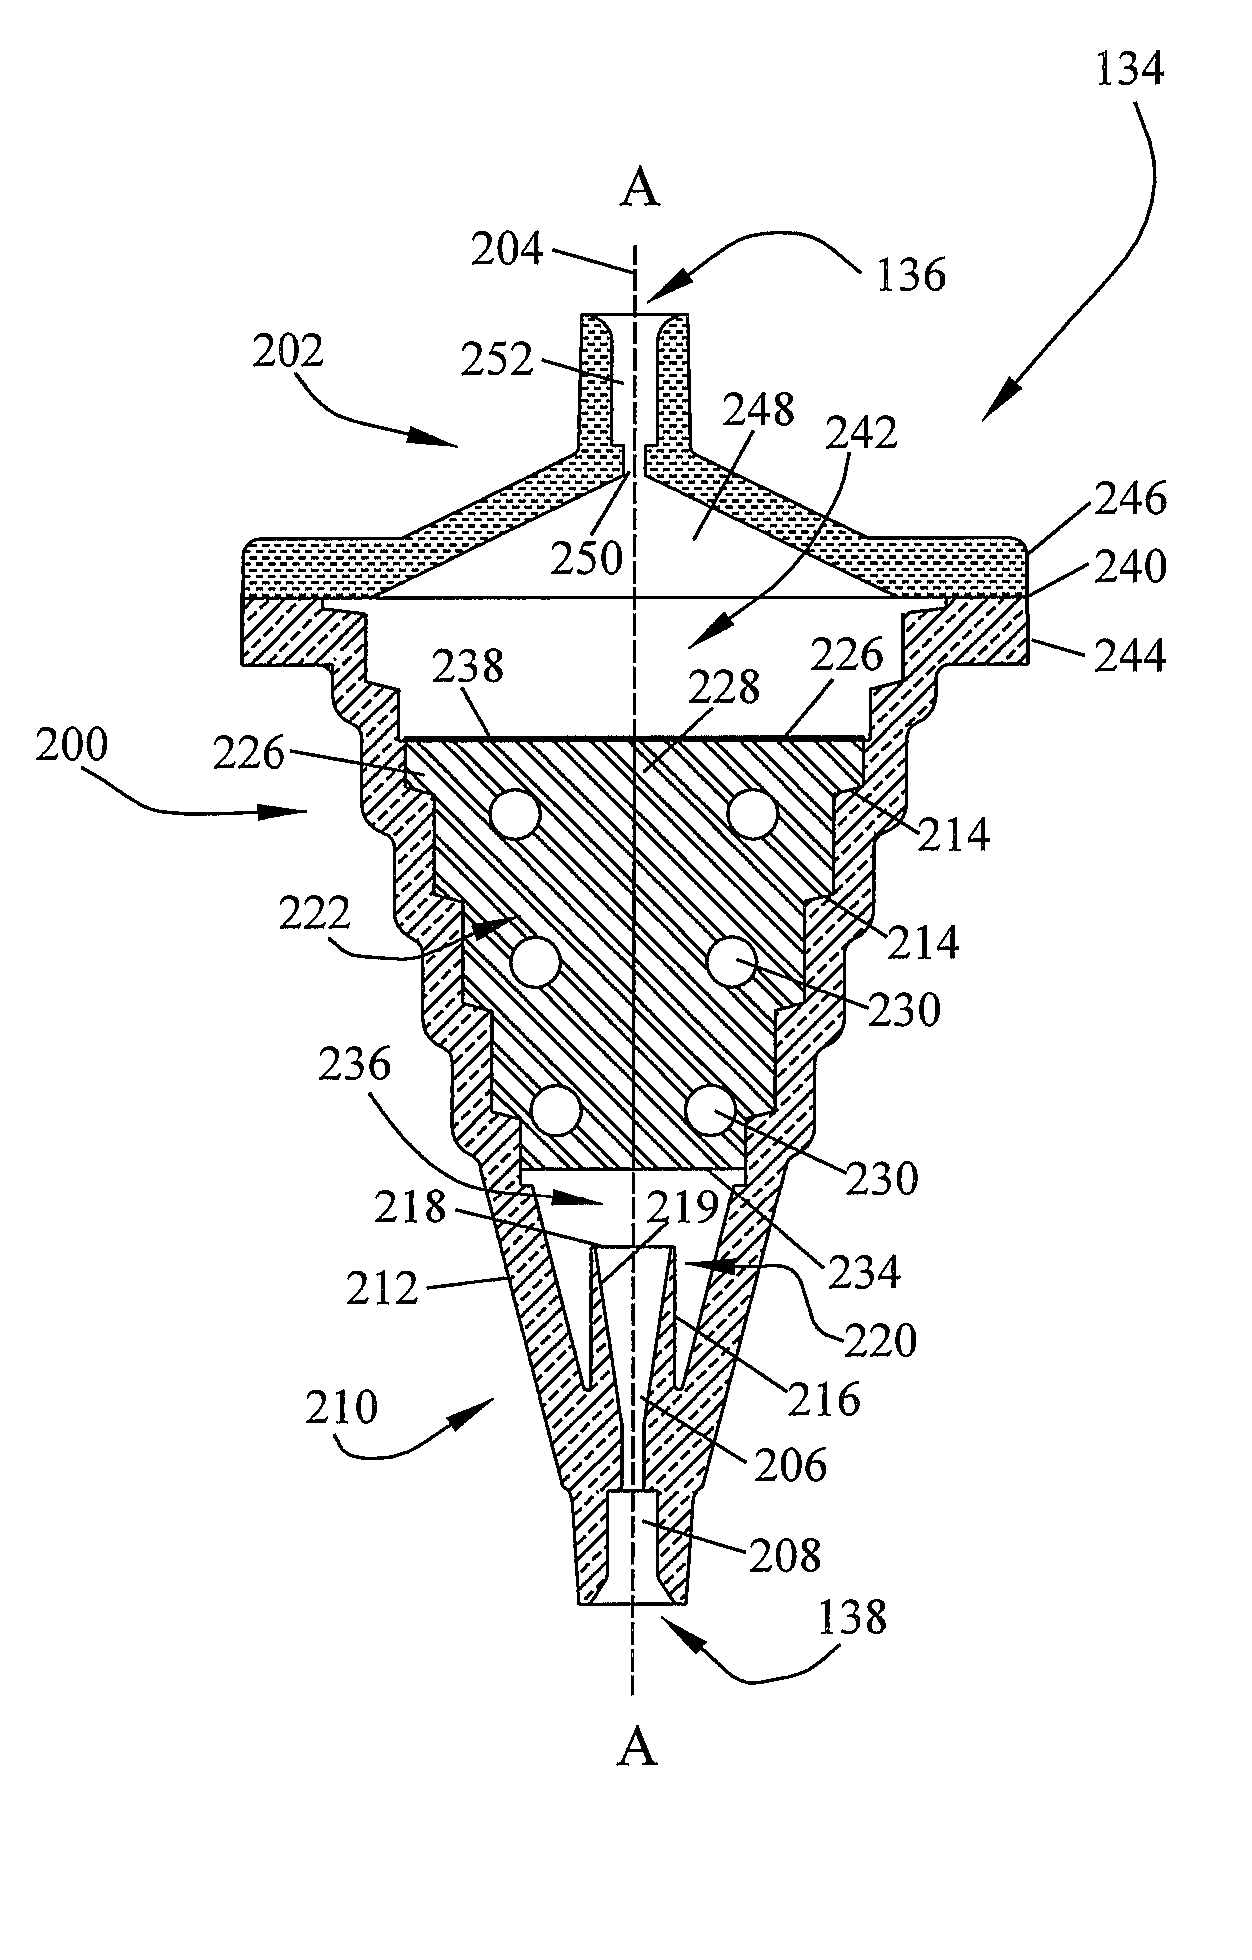 Blood processing apparatus with cell capture chamber with protruding inlet